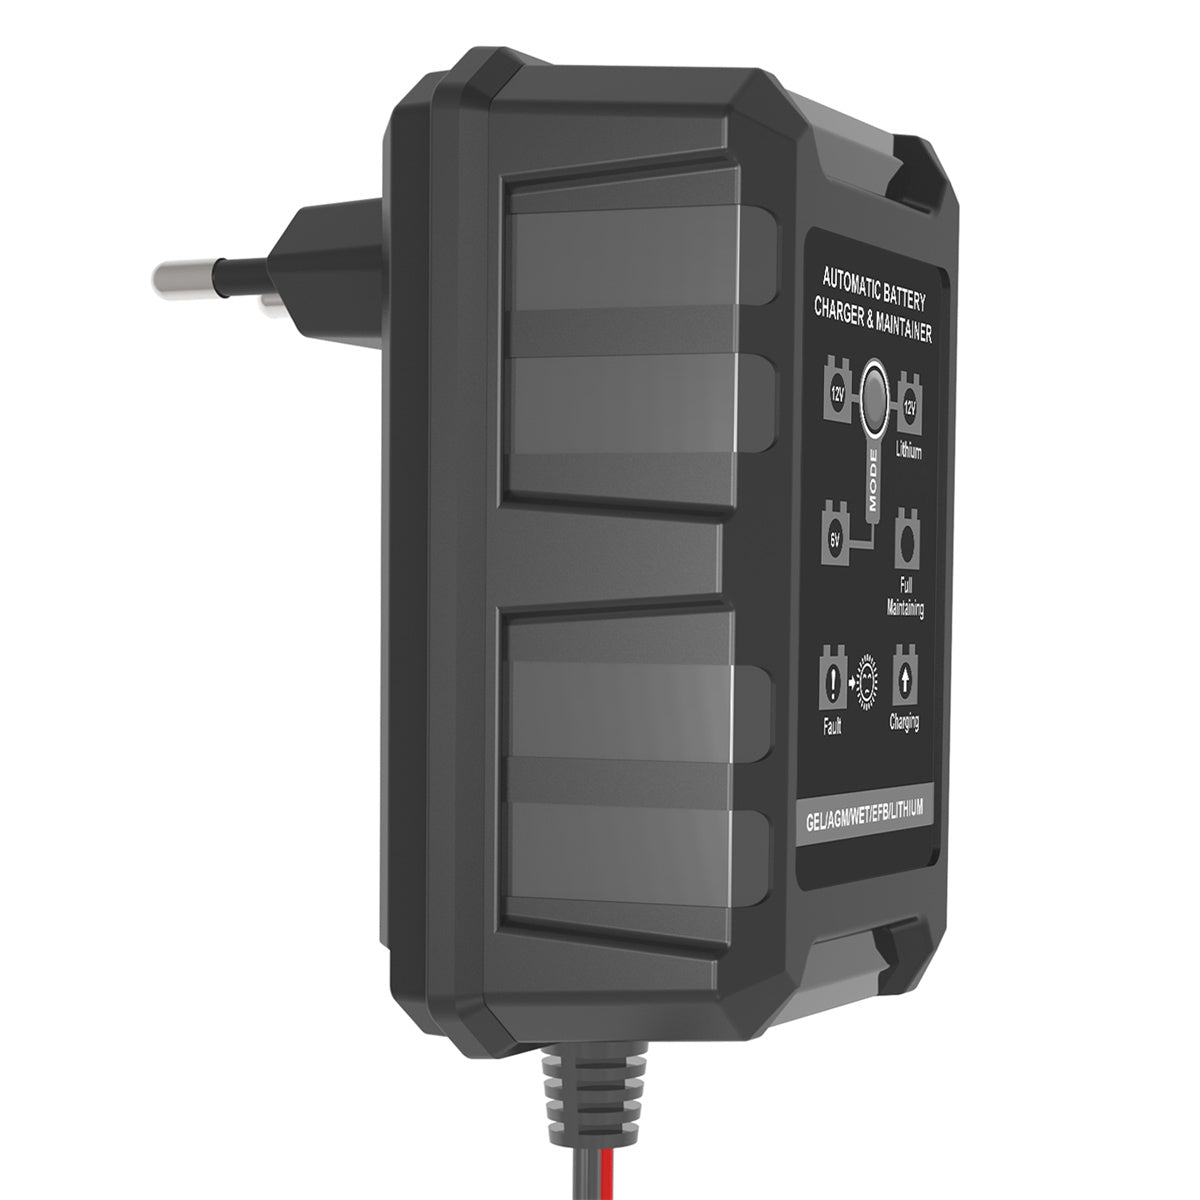 B98 Automatic Smart Charger, 1.5Amp Wall Mount